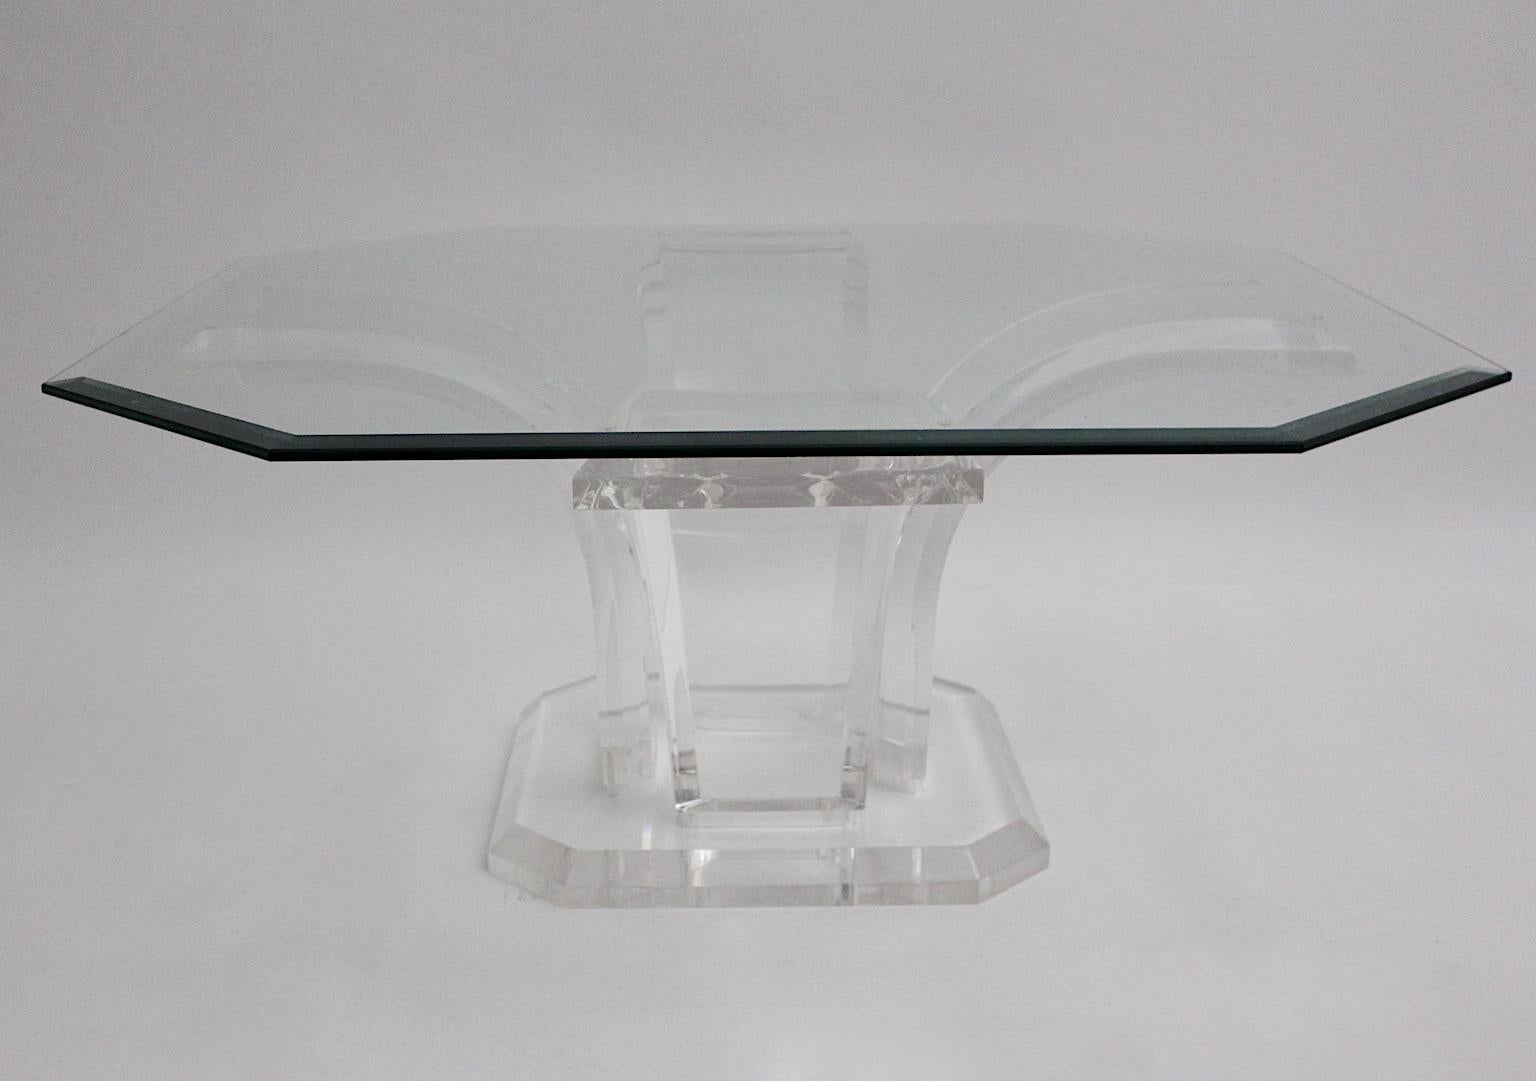 Space Age Vintage Rectangular Transparent Lucite Glass Coffee Table circa 1970 im Angebot 4